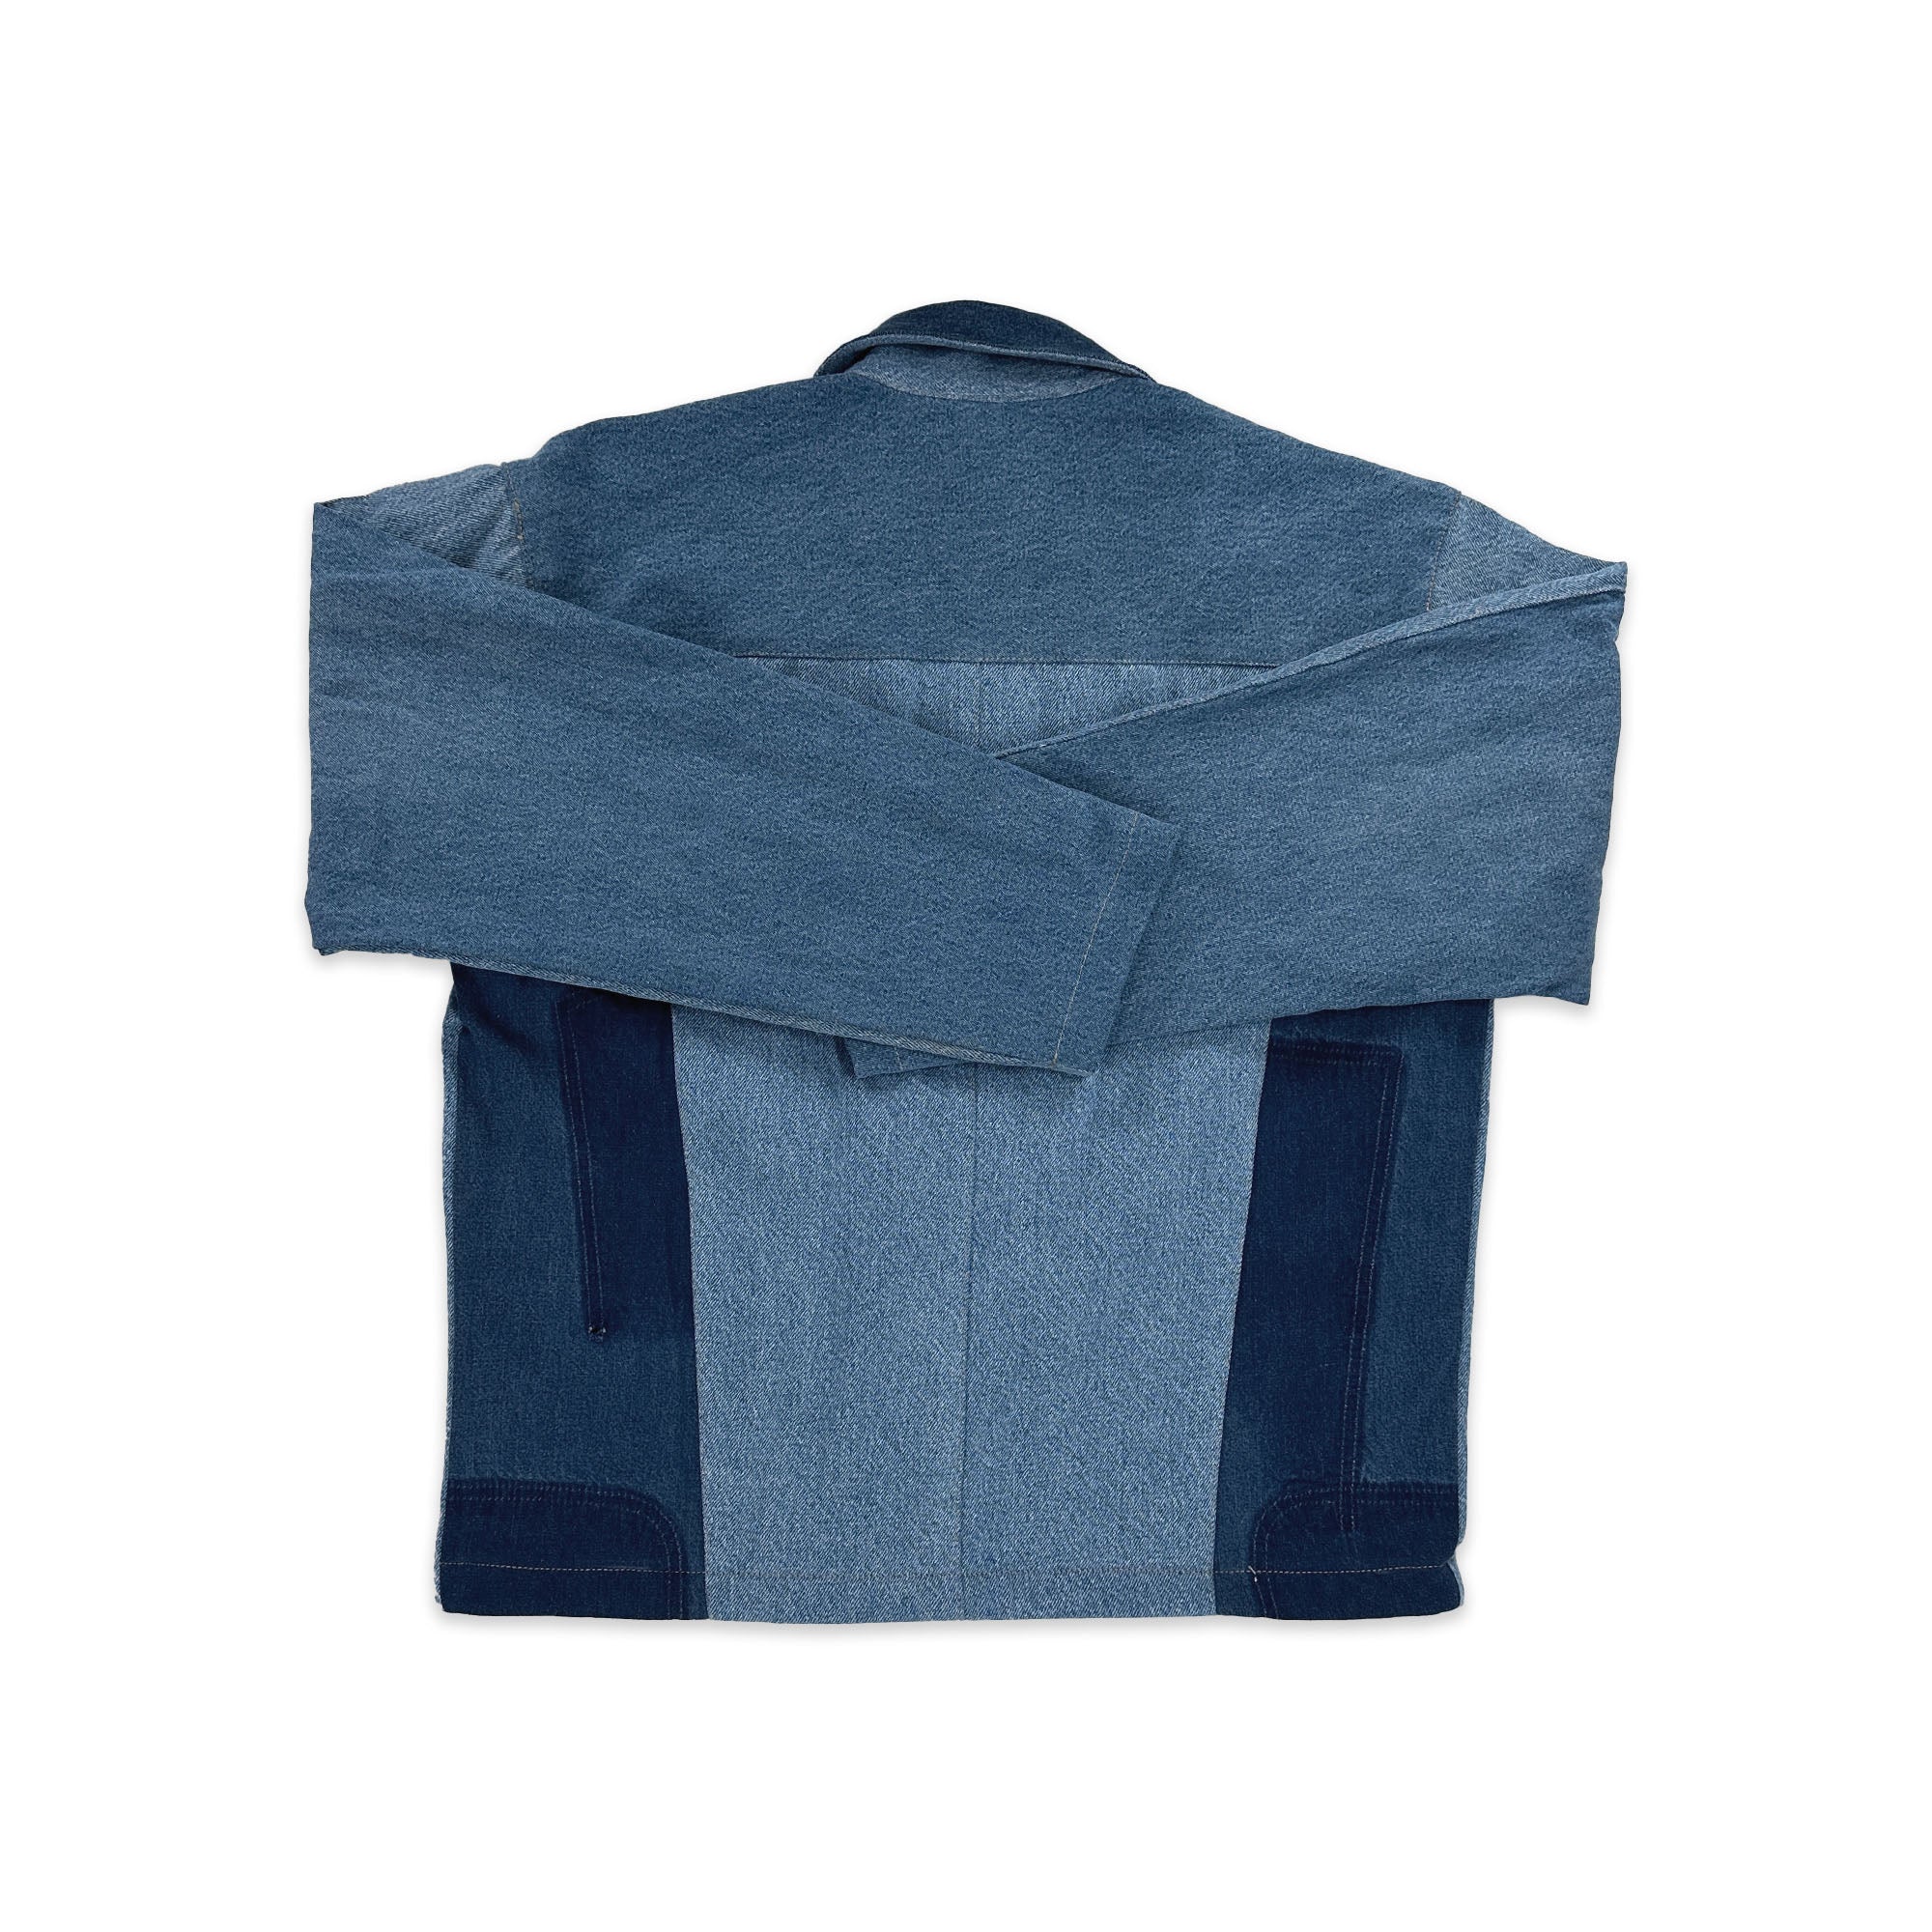 Chore Coat Made From Upcycled Work Jeans - Large Great Lakes Reclaimed Denim